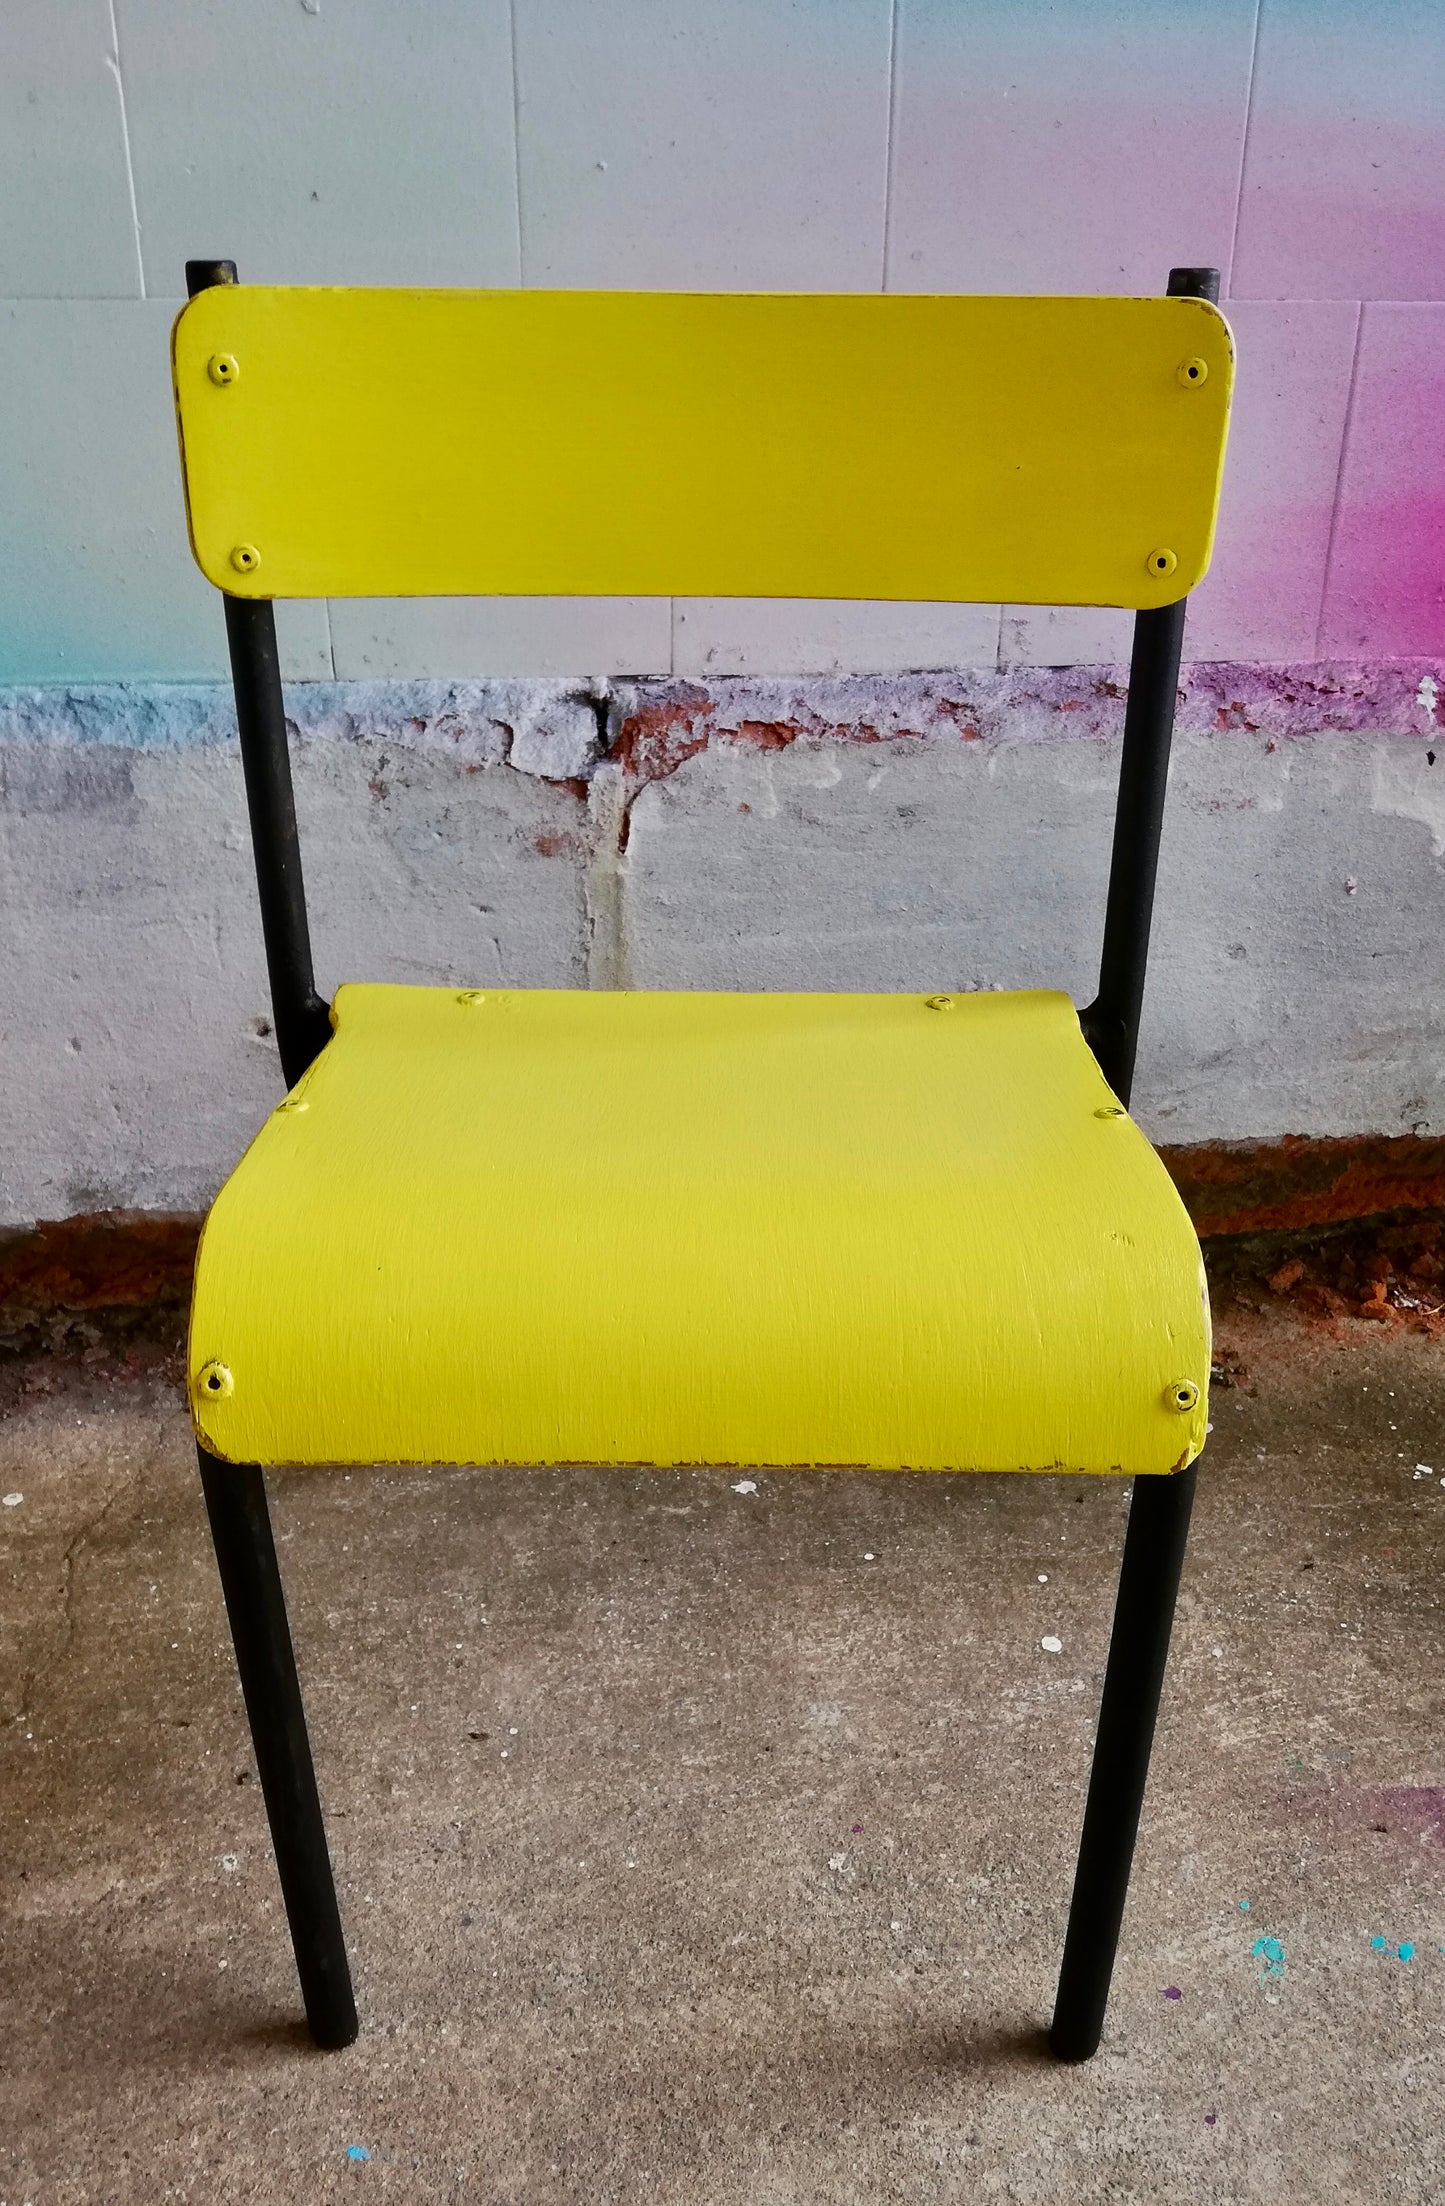 Painted vintage children's school desks, chairs or sets you choose design and colours